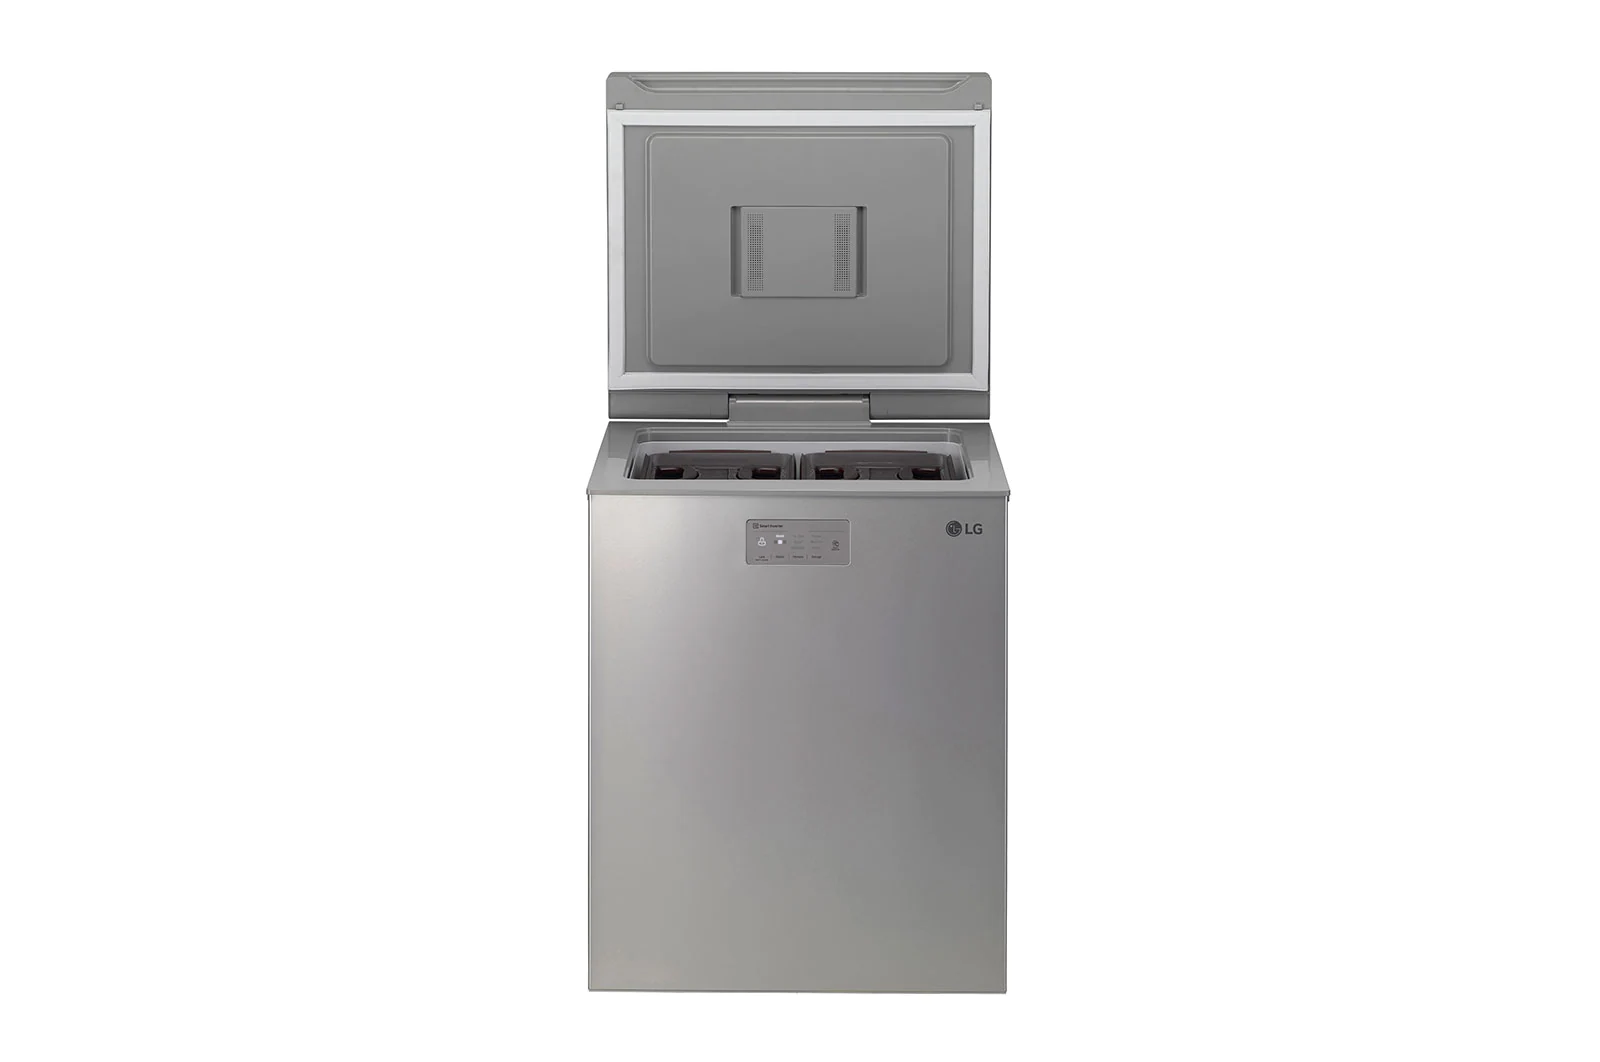 An image that shows the LG 4.5 cu. ft. Kimchi Refrigerator